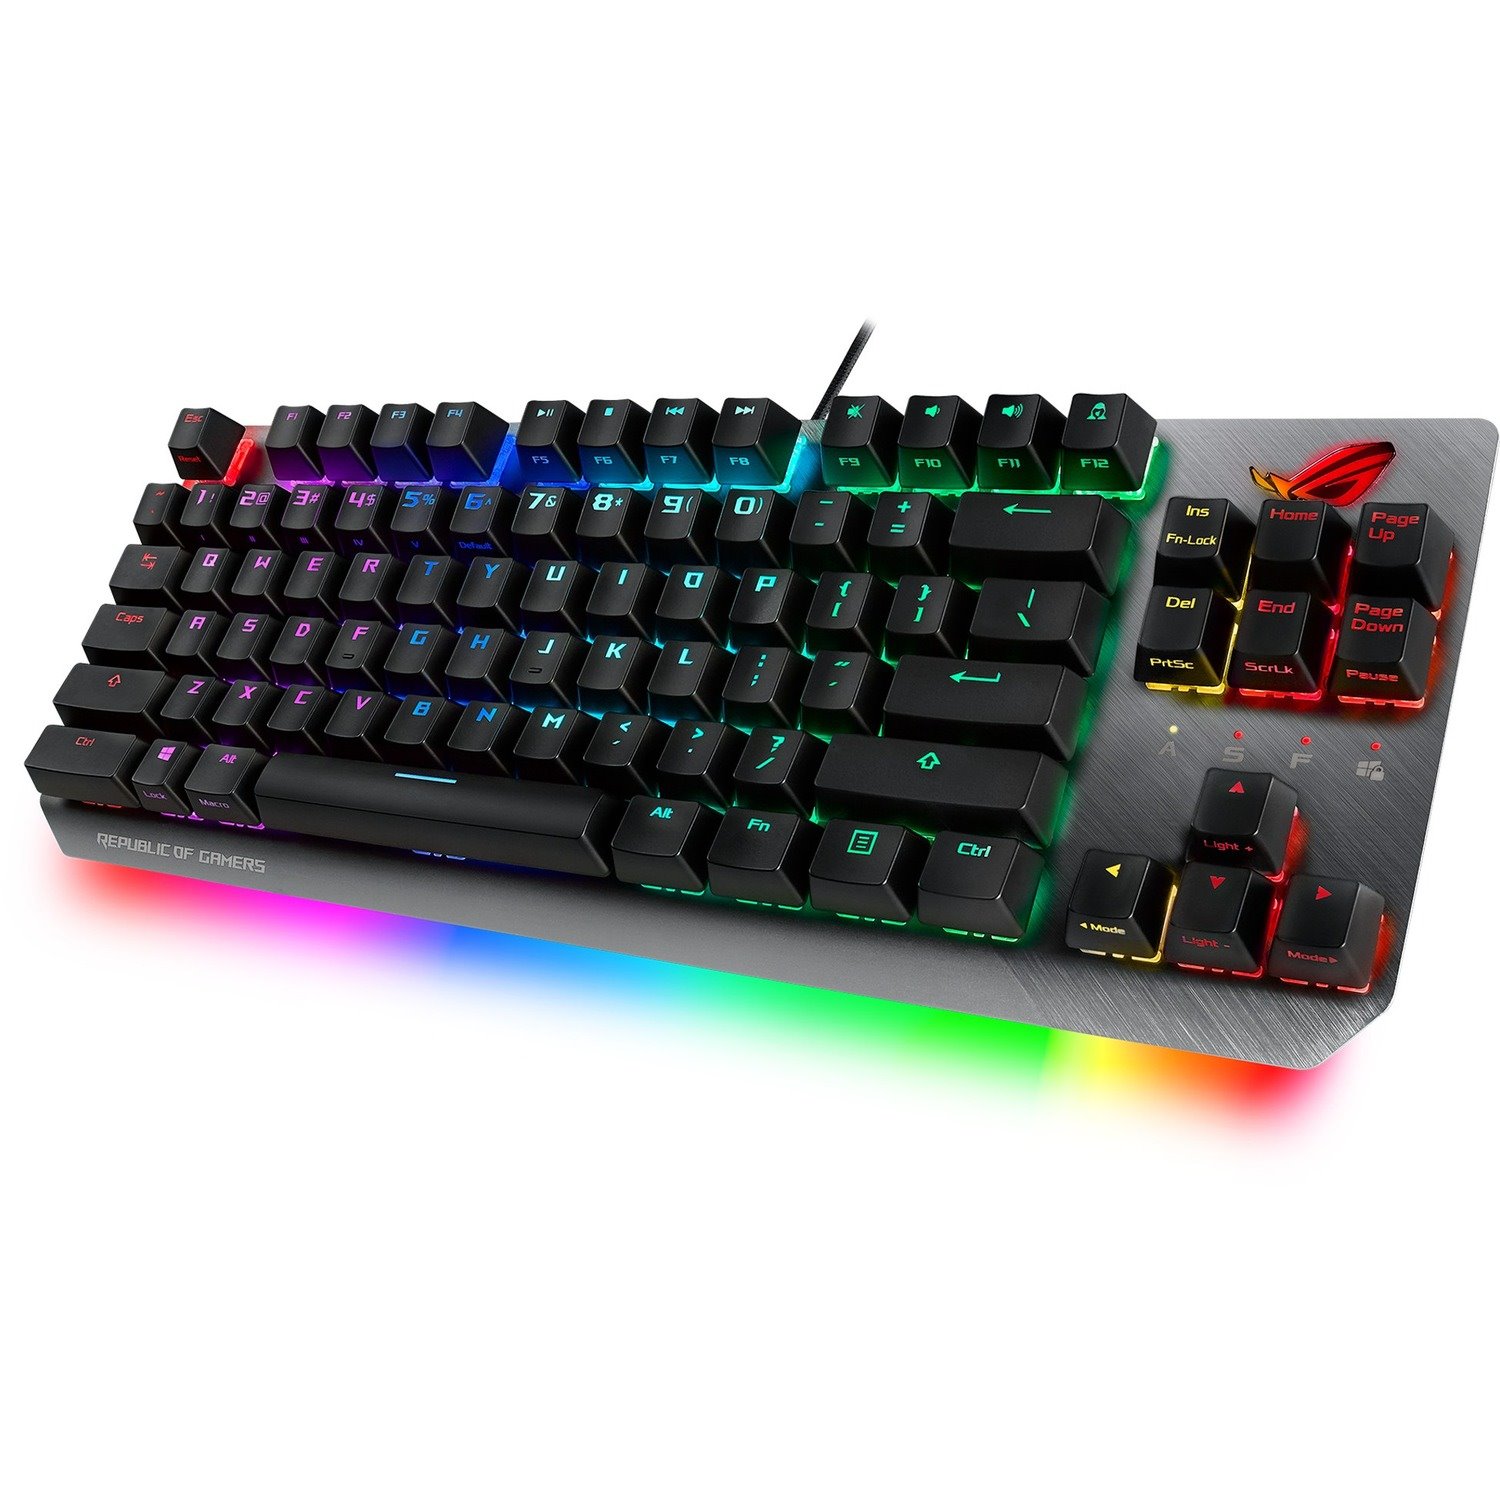 Asus ROG Strix Scope NX TKL Gaming Keyboard - Cable Connectivity - USB 2.0 Interface - RGB LED - Moonlight White